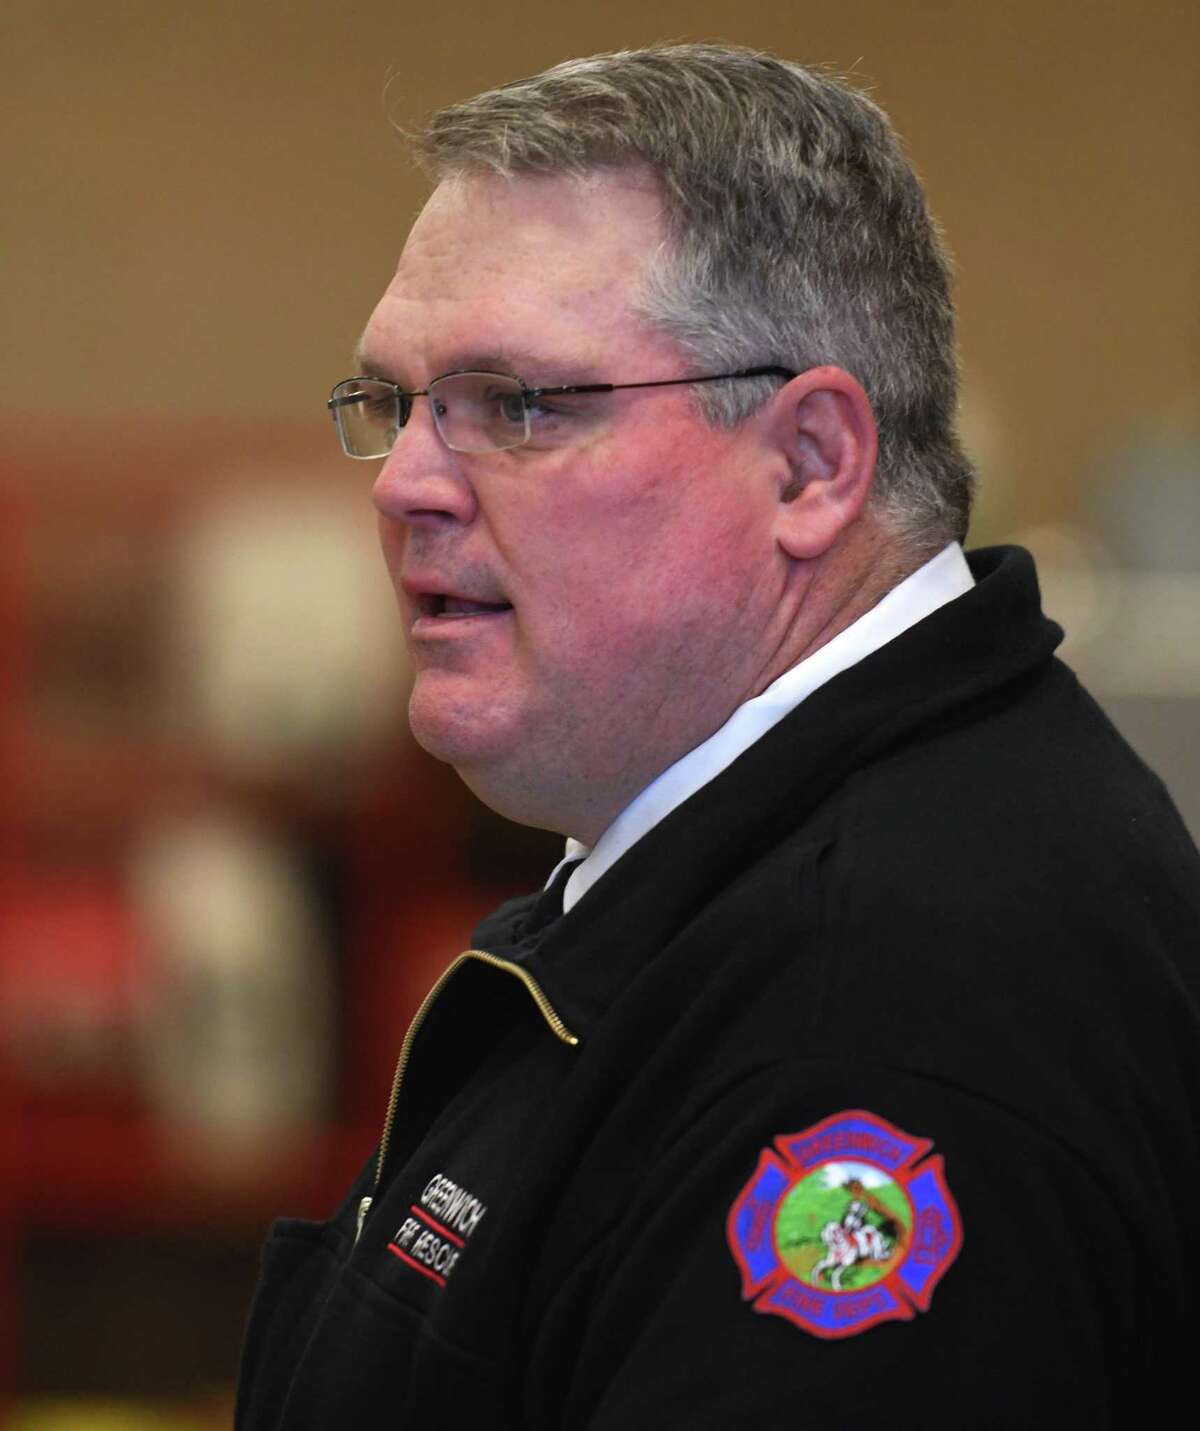 Greenwich Fire Chief Joseph McHugh presented the results of an internal departmental review to the Board of Selectmen on Thursday.